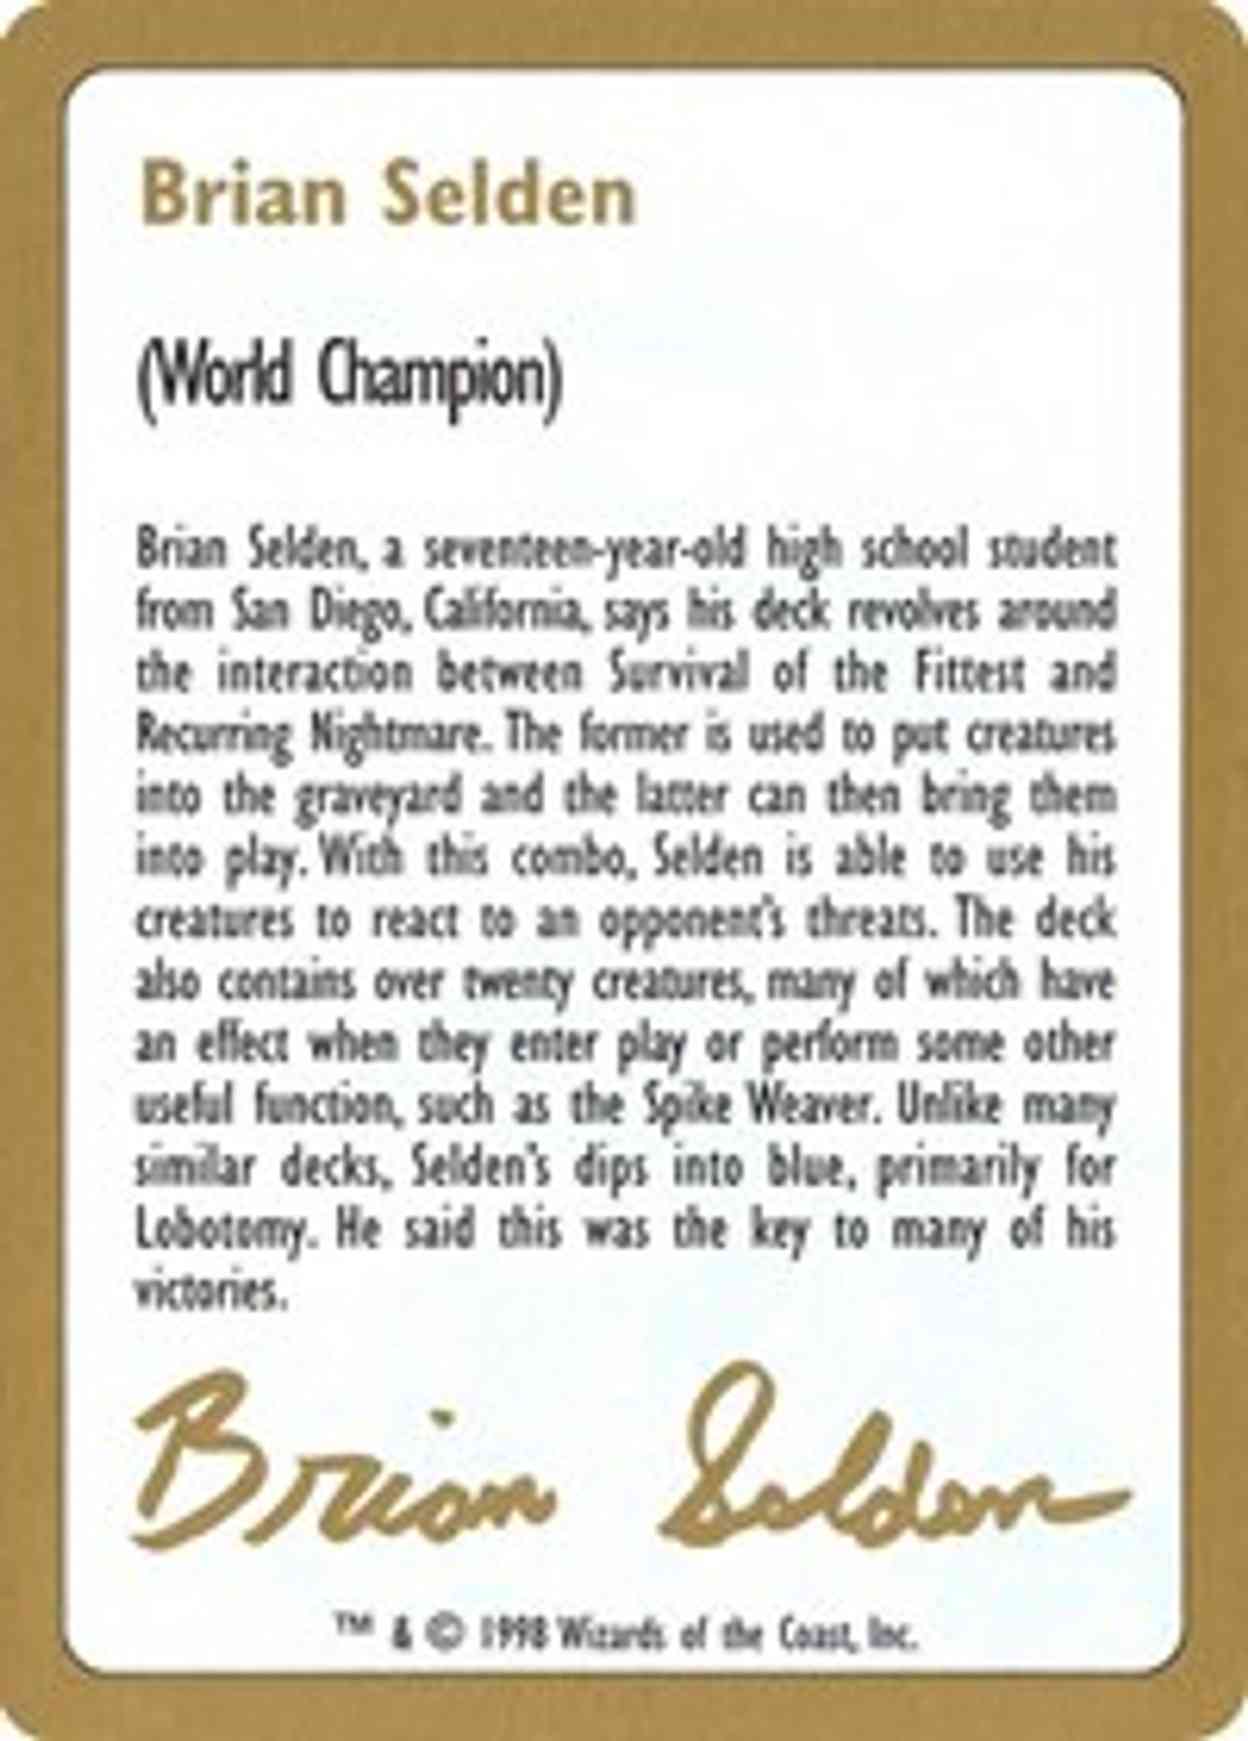 1998 Brian Selden Biography Card magic card front